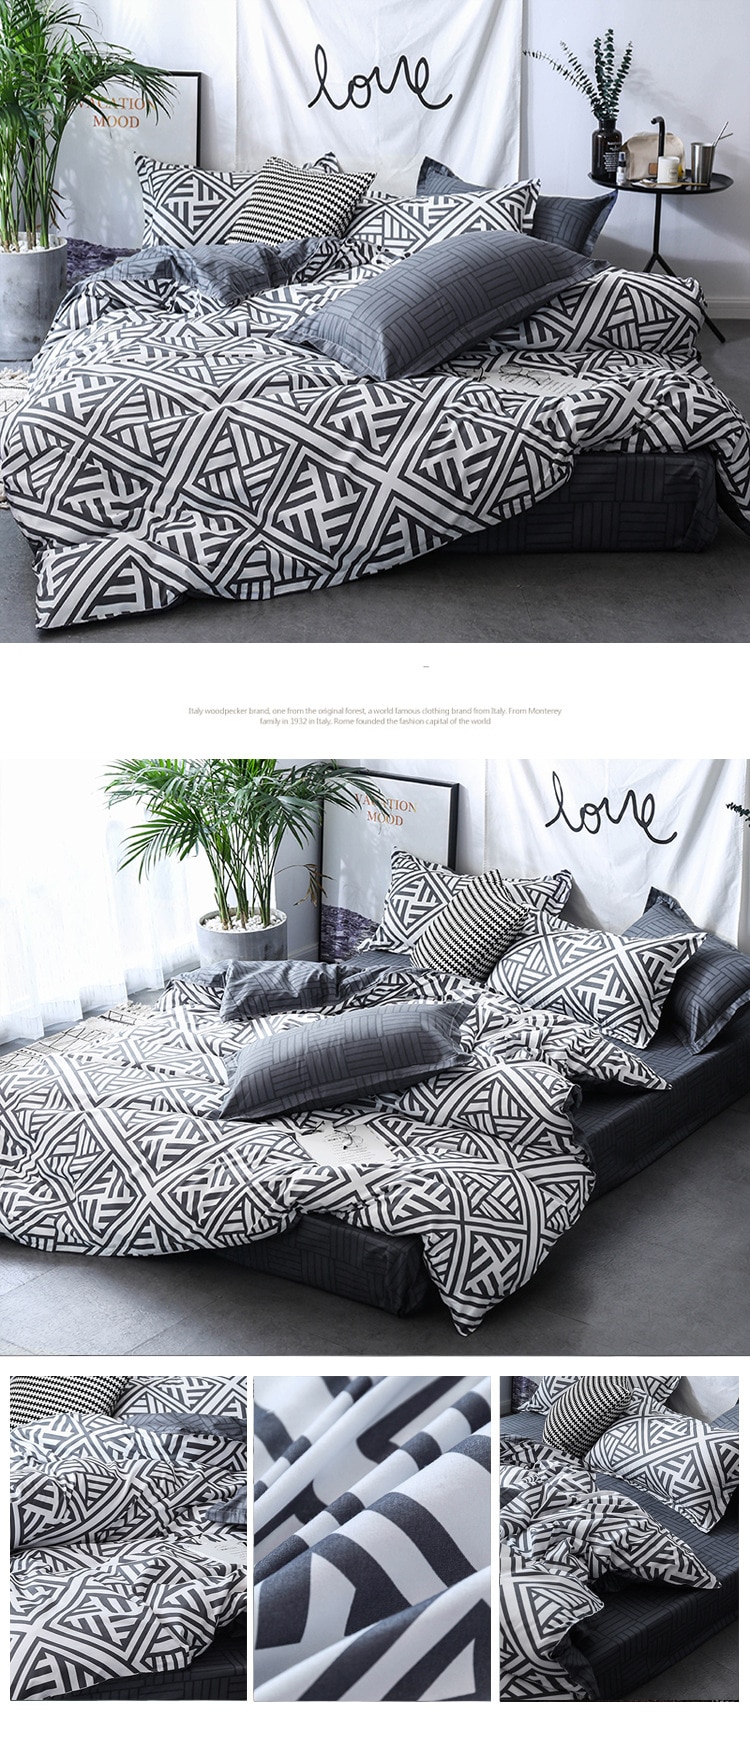 Simple Bedclothes Quilt Cover Pillowcase Three-Piece Bedding Set With Pillow Case Single Double Comforter Black Duvet Cover